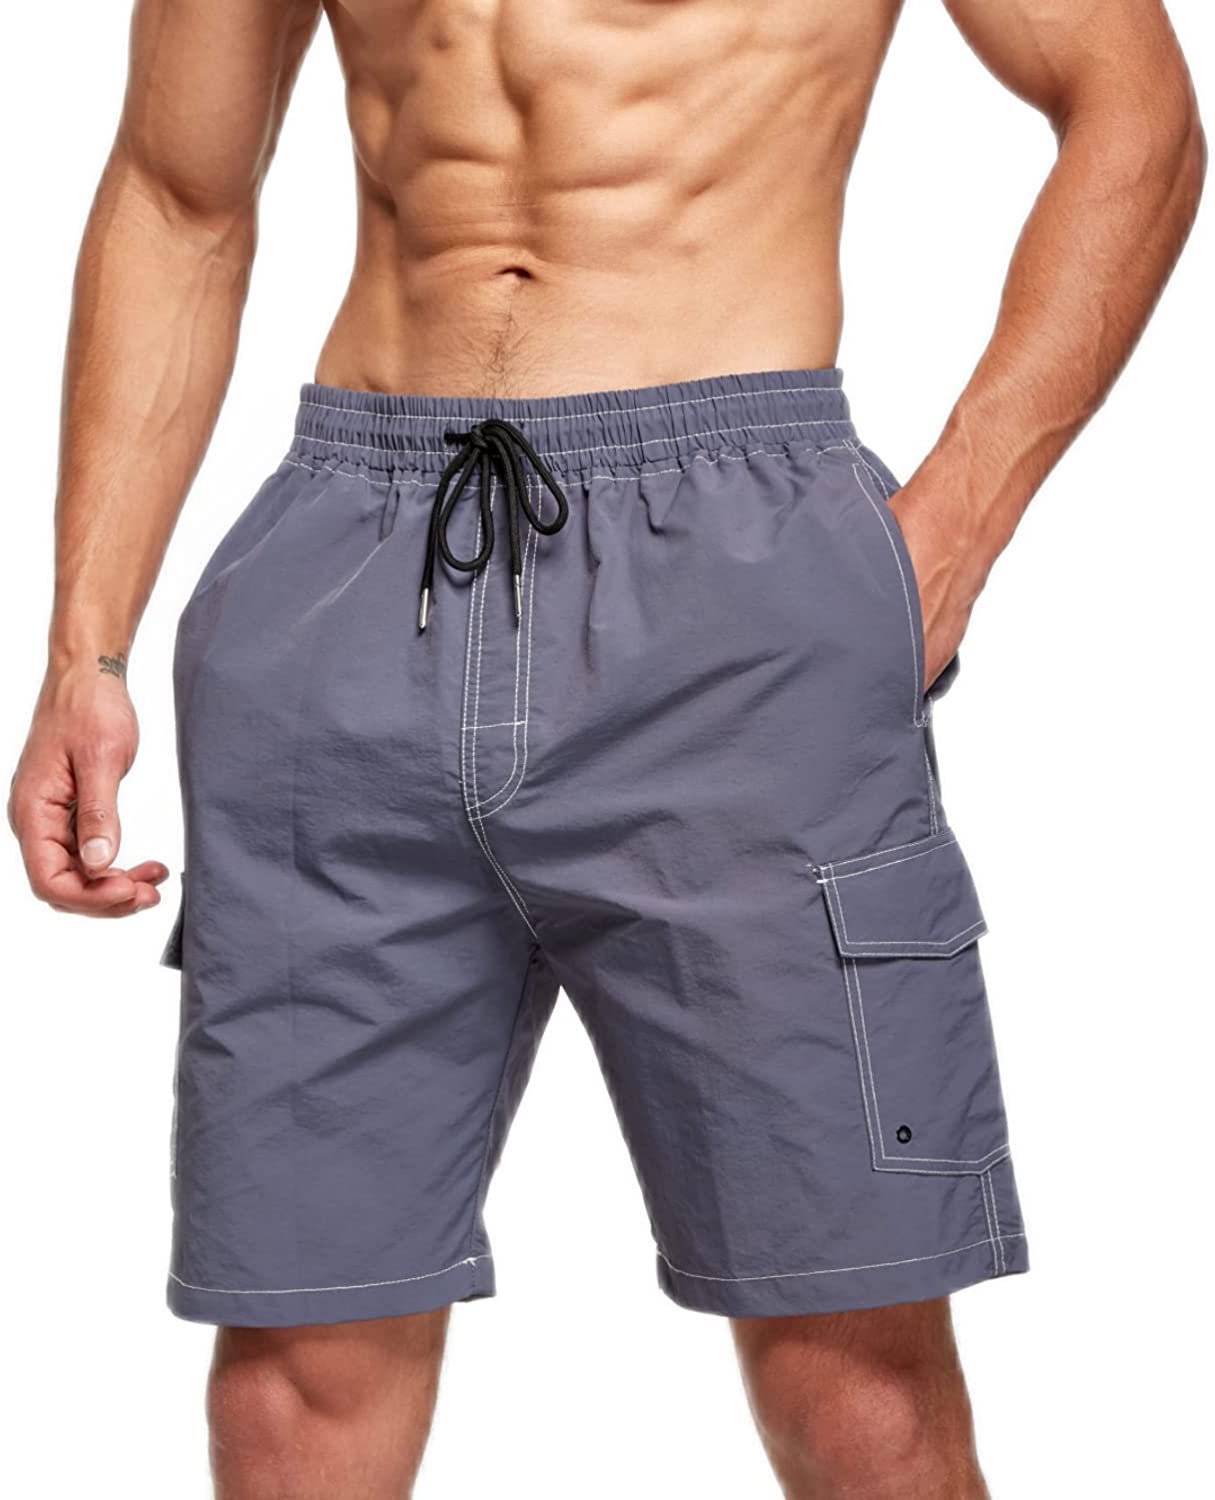 Men Shorts Summer Quick Dry Swim Trunks with Pockets Beach Surfing Swimming Shorts 